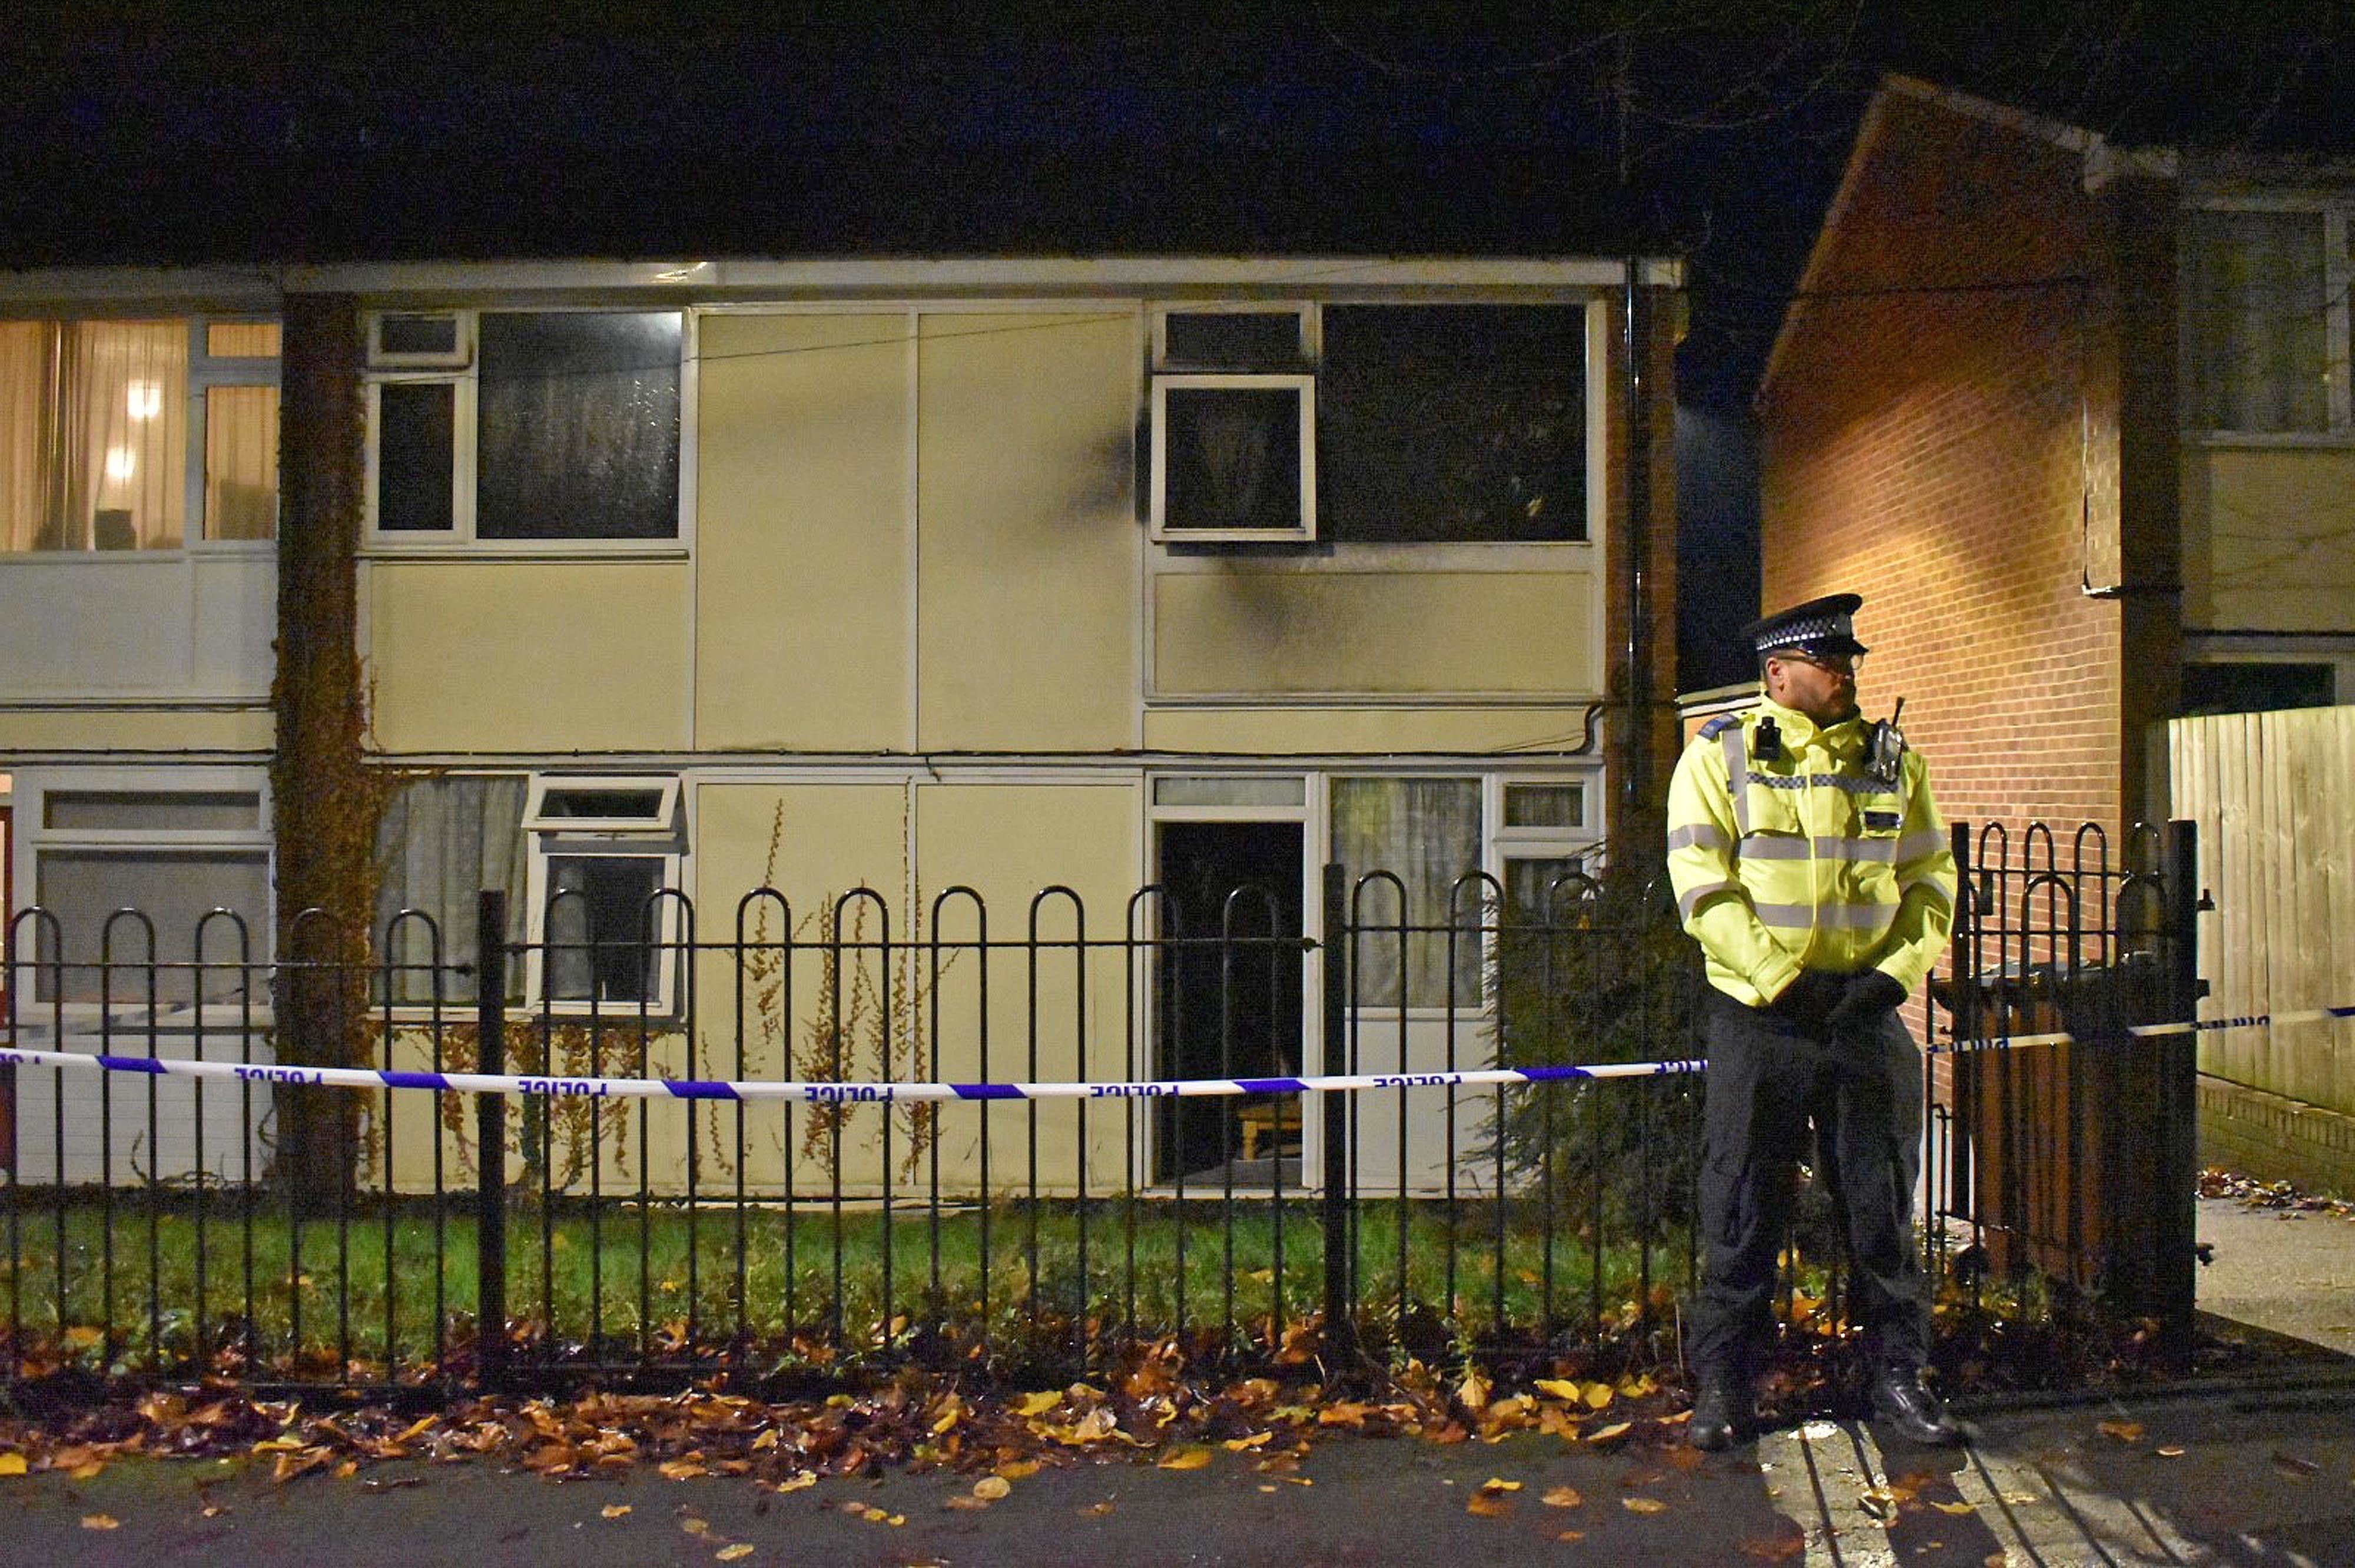 Man arrested after two children die in Nottingham flat fire